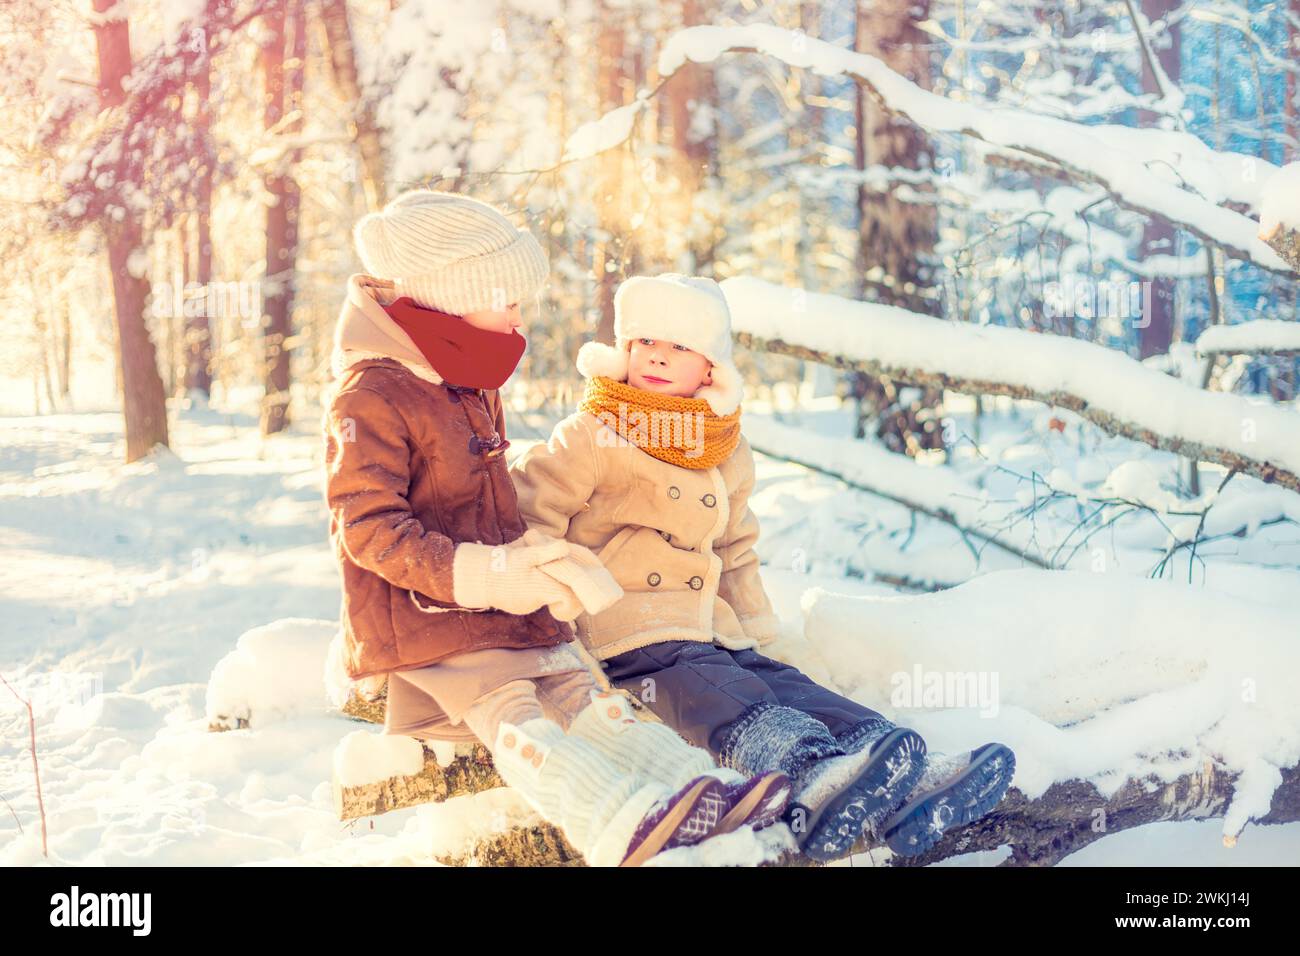 Children sit on a tree in a winter snowy forest. Frosty sunny day. Stock Photo